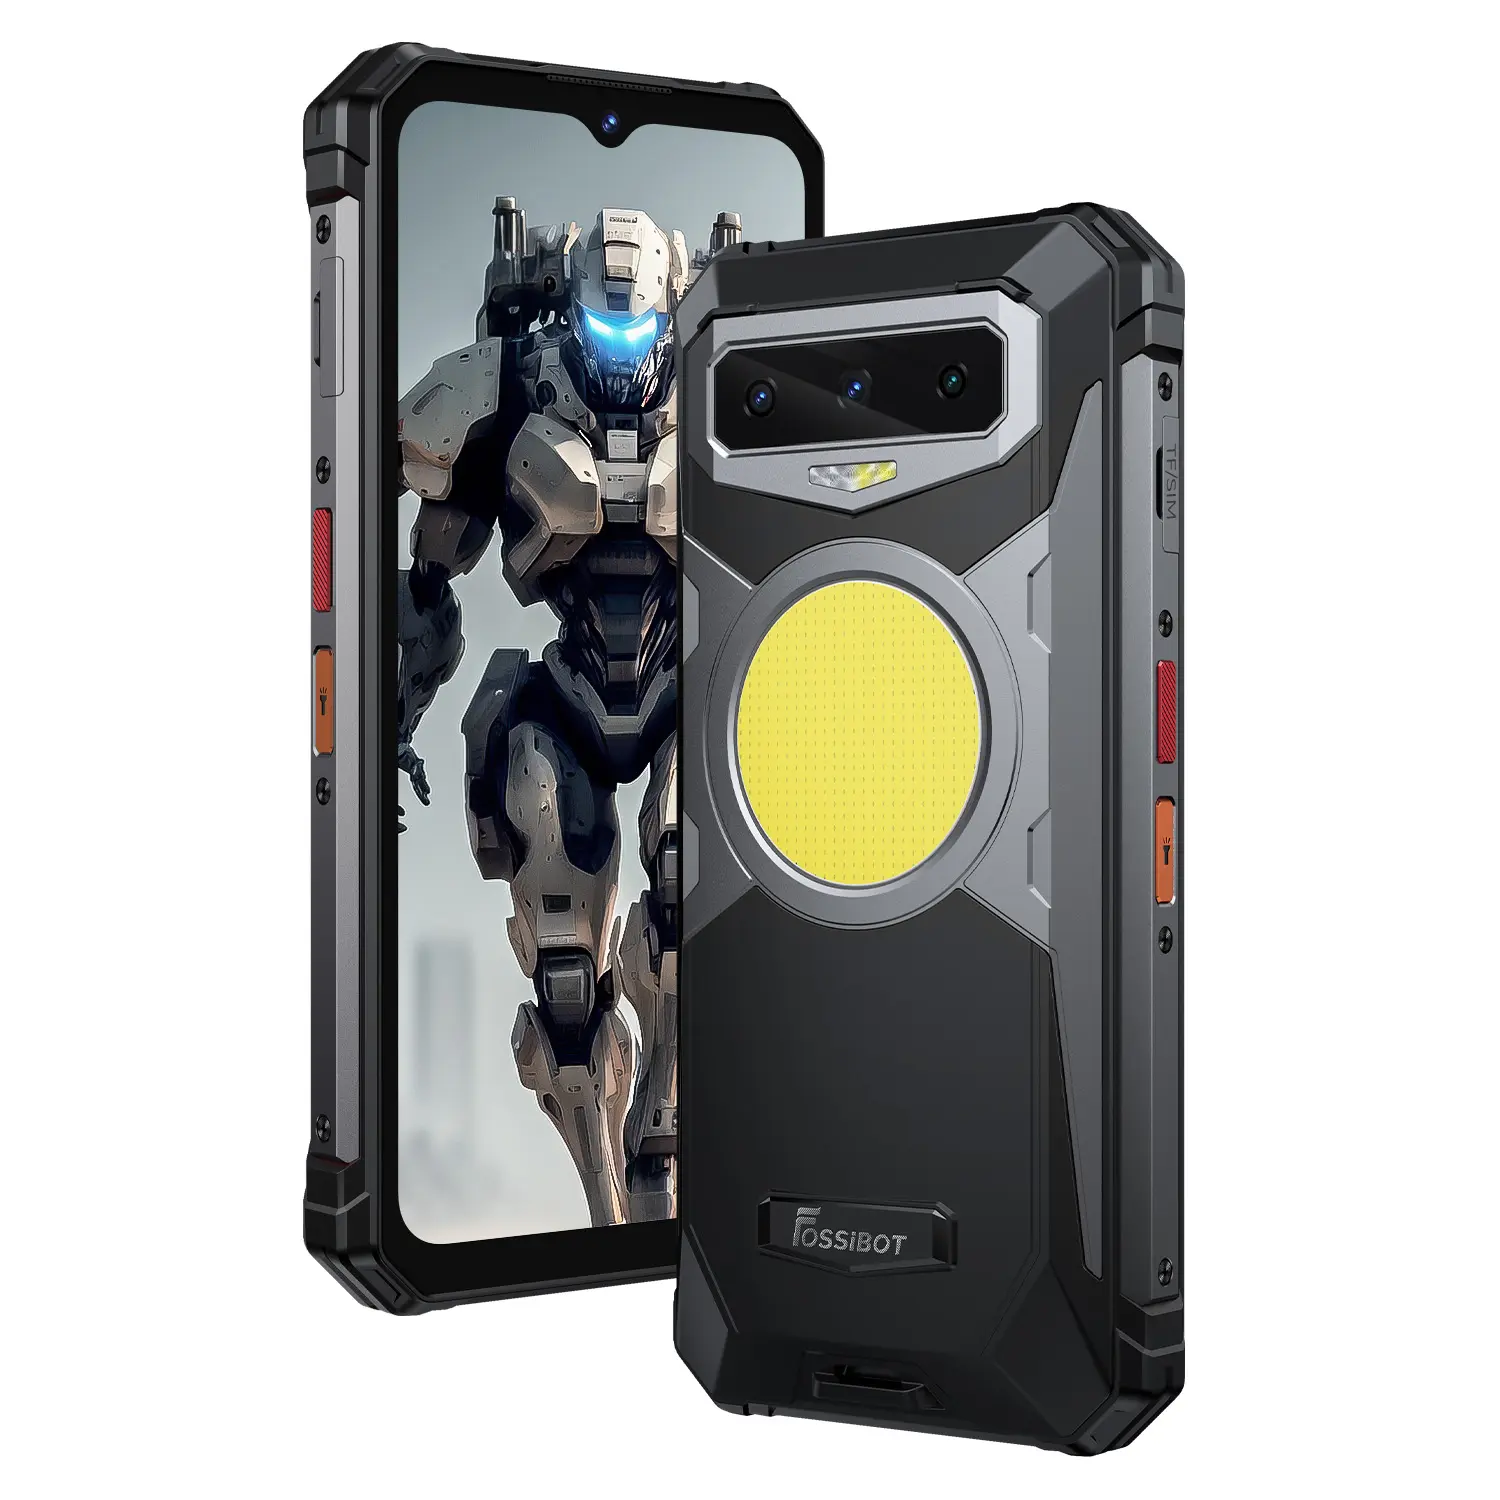 Fossibot rugged smartphone 16500mAH 20GB + 256GB 108M cellulare con fotocamera 6.58 FHD + 120hz FOSSiBOT F102 cellulare